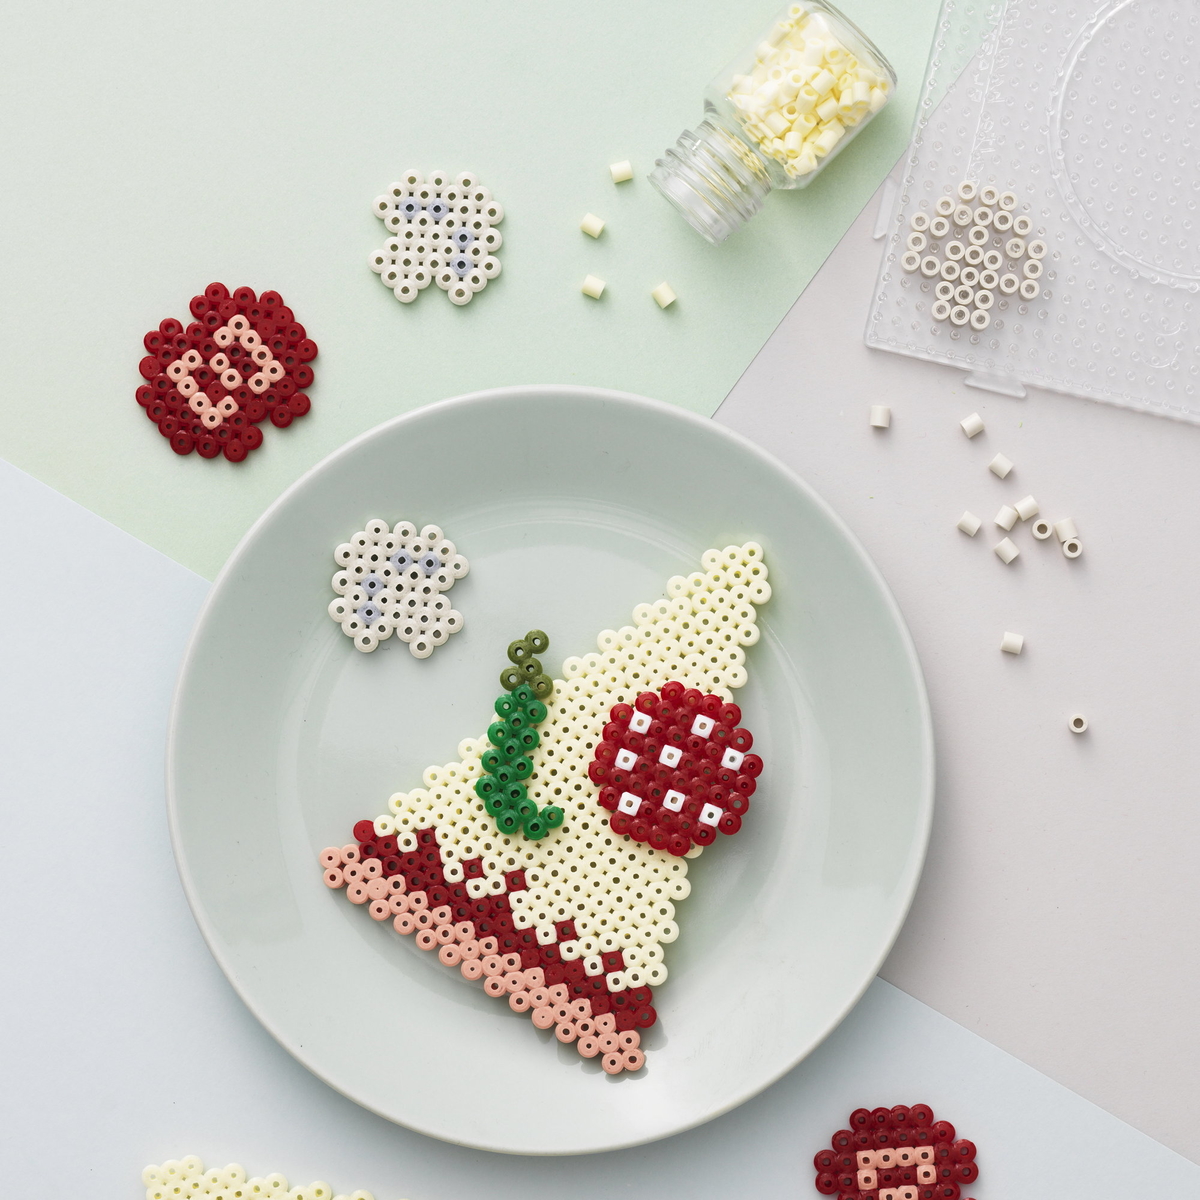 Make a beaded toy pizza